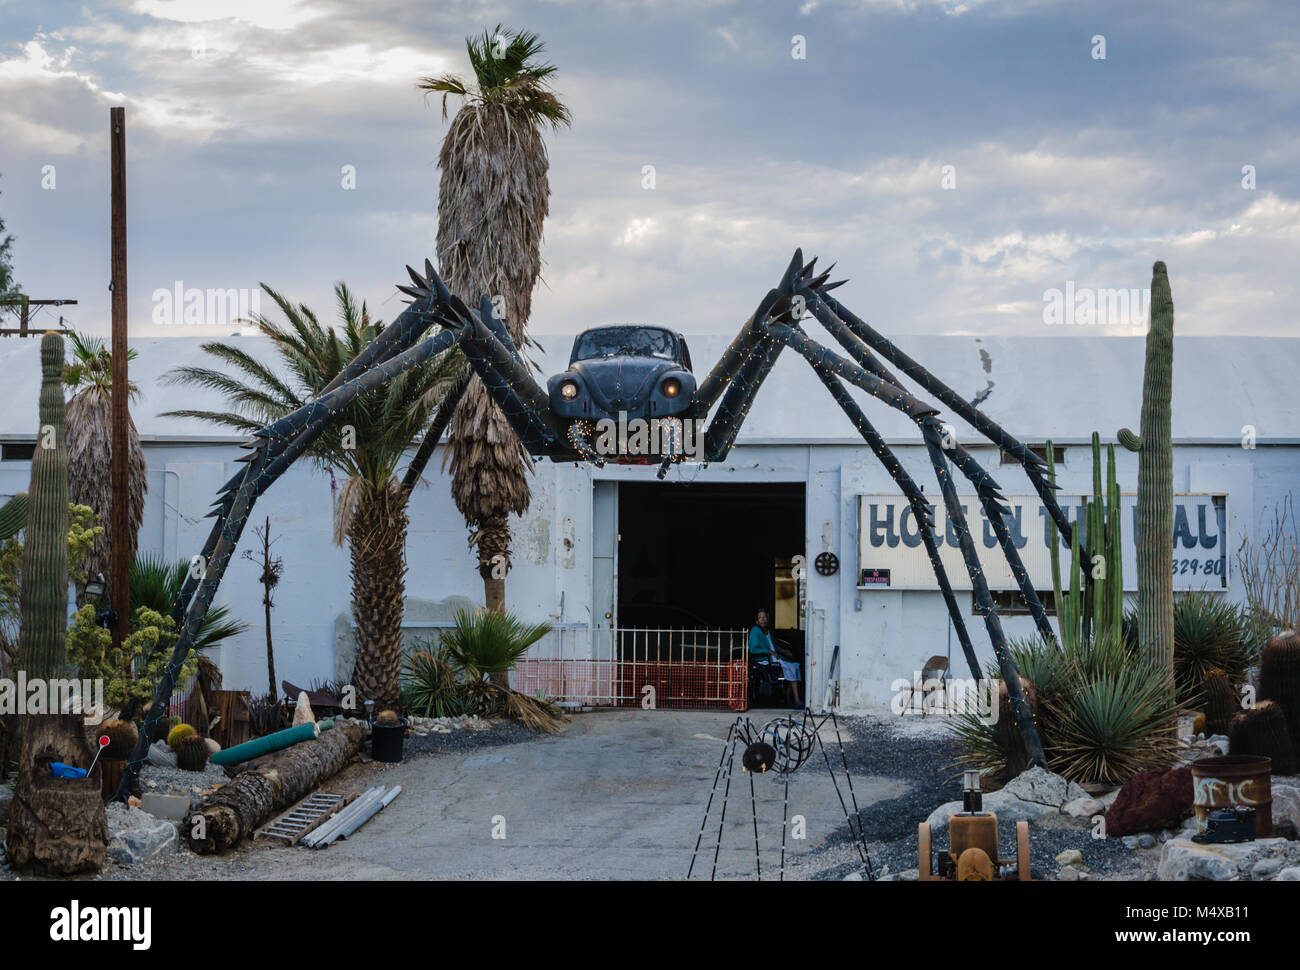 Roadside attraction in the Mojave Desert features a giant black spider welded together with a Volkswagon Bug car at the center. Stock Photo